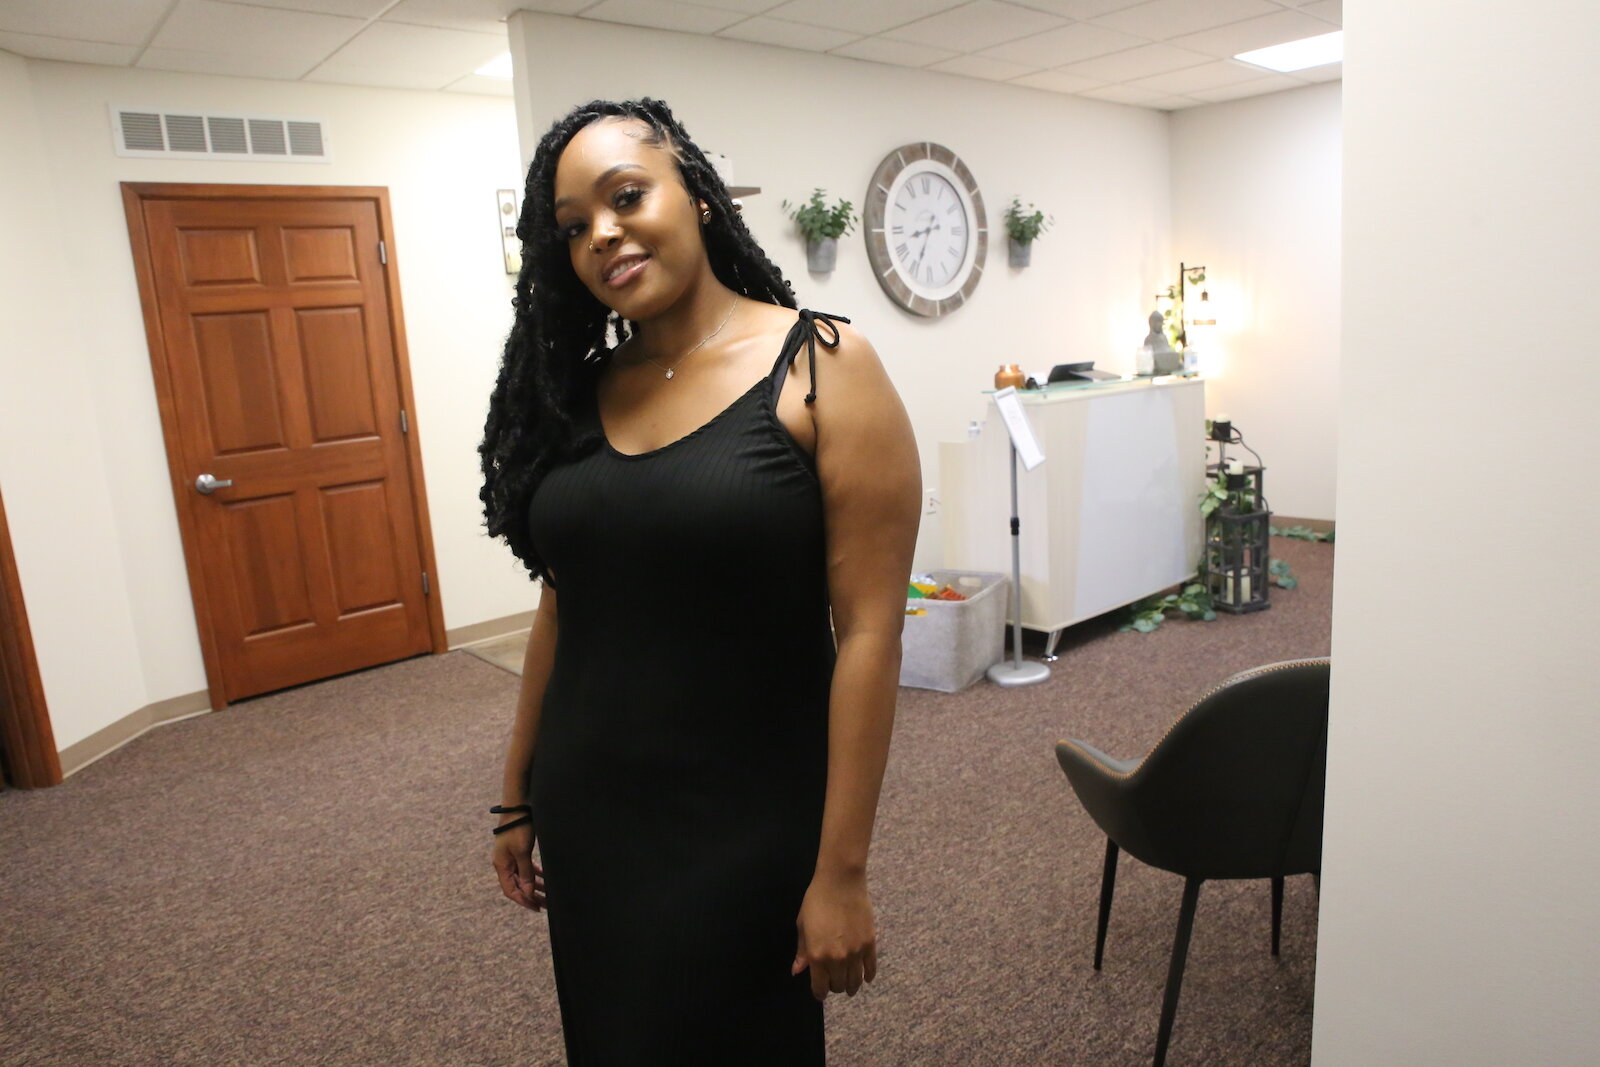 In June 2021, Shi'Dasha “Shi” James opened her first location for Shi Essentials Studio and Spa at 5115 North Bend Dr. in Fort Wayne.